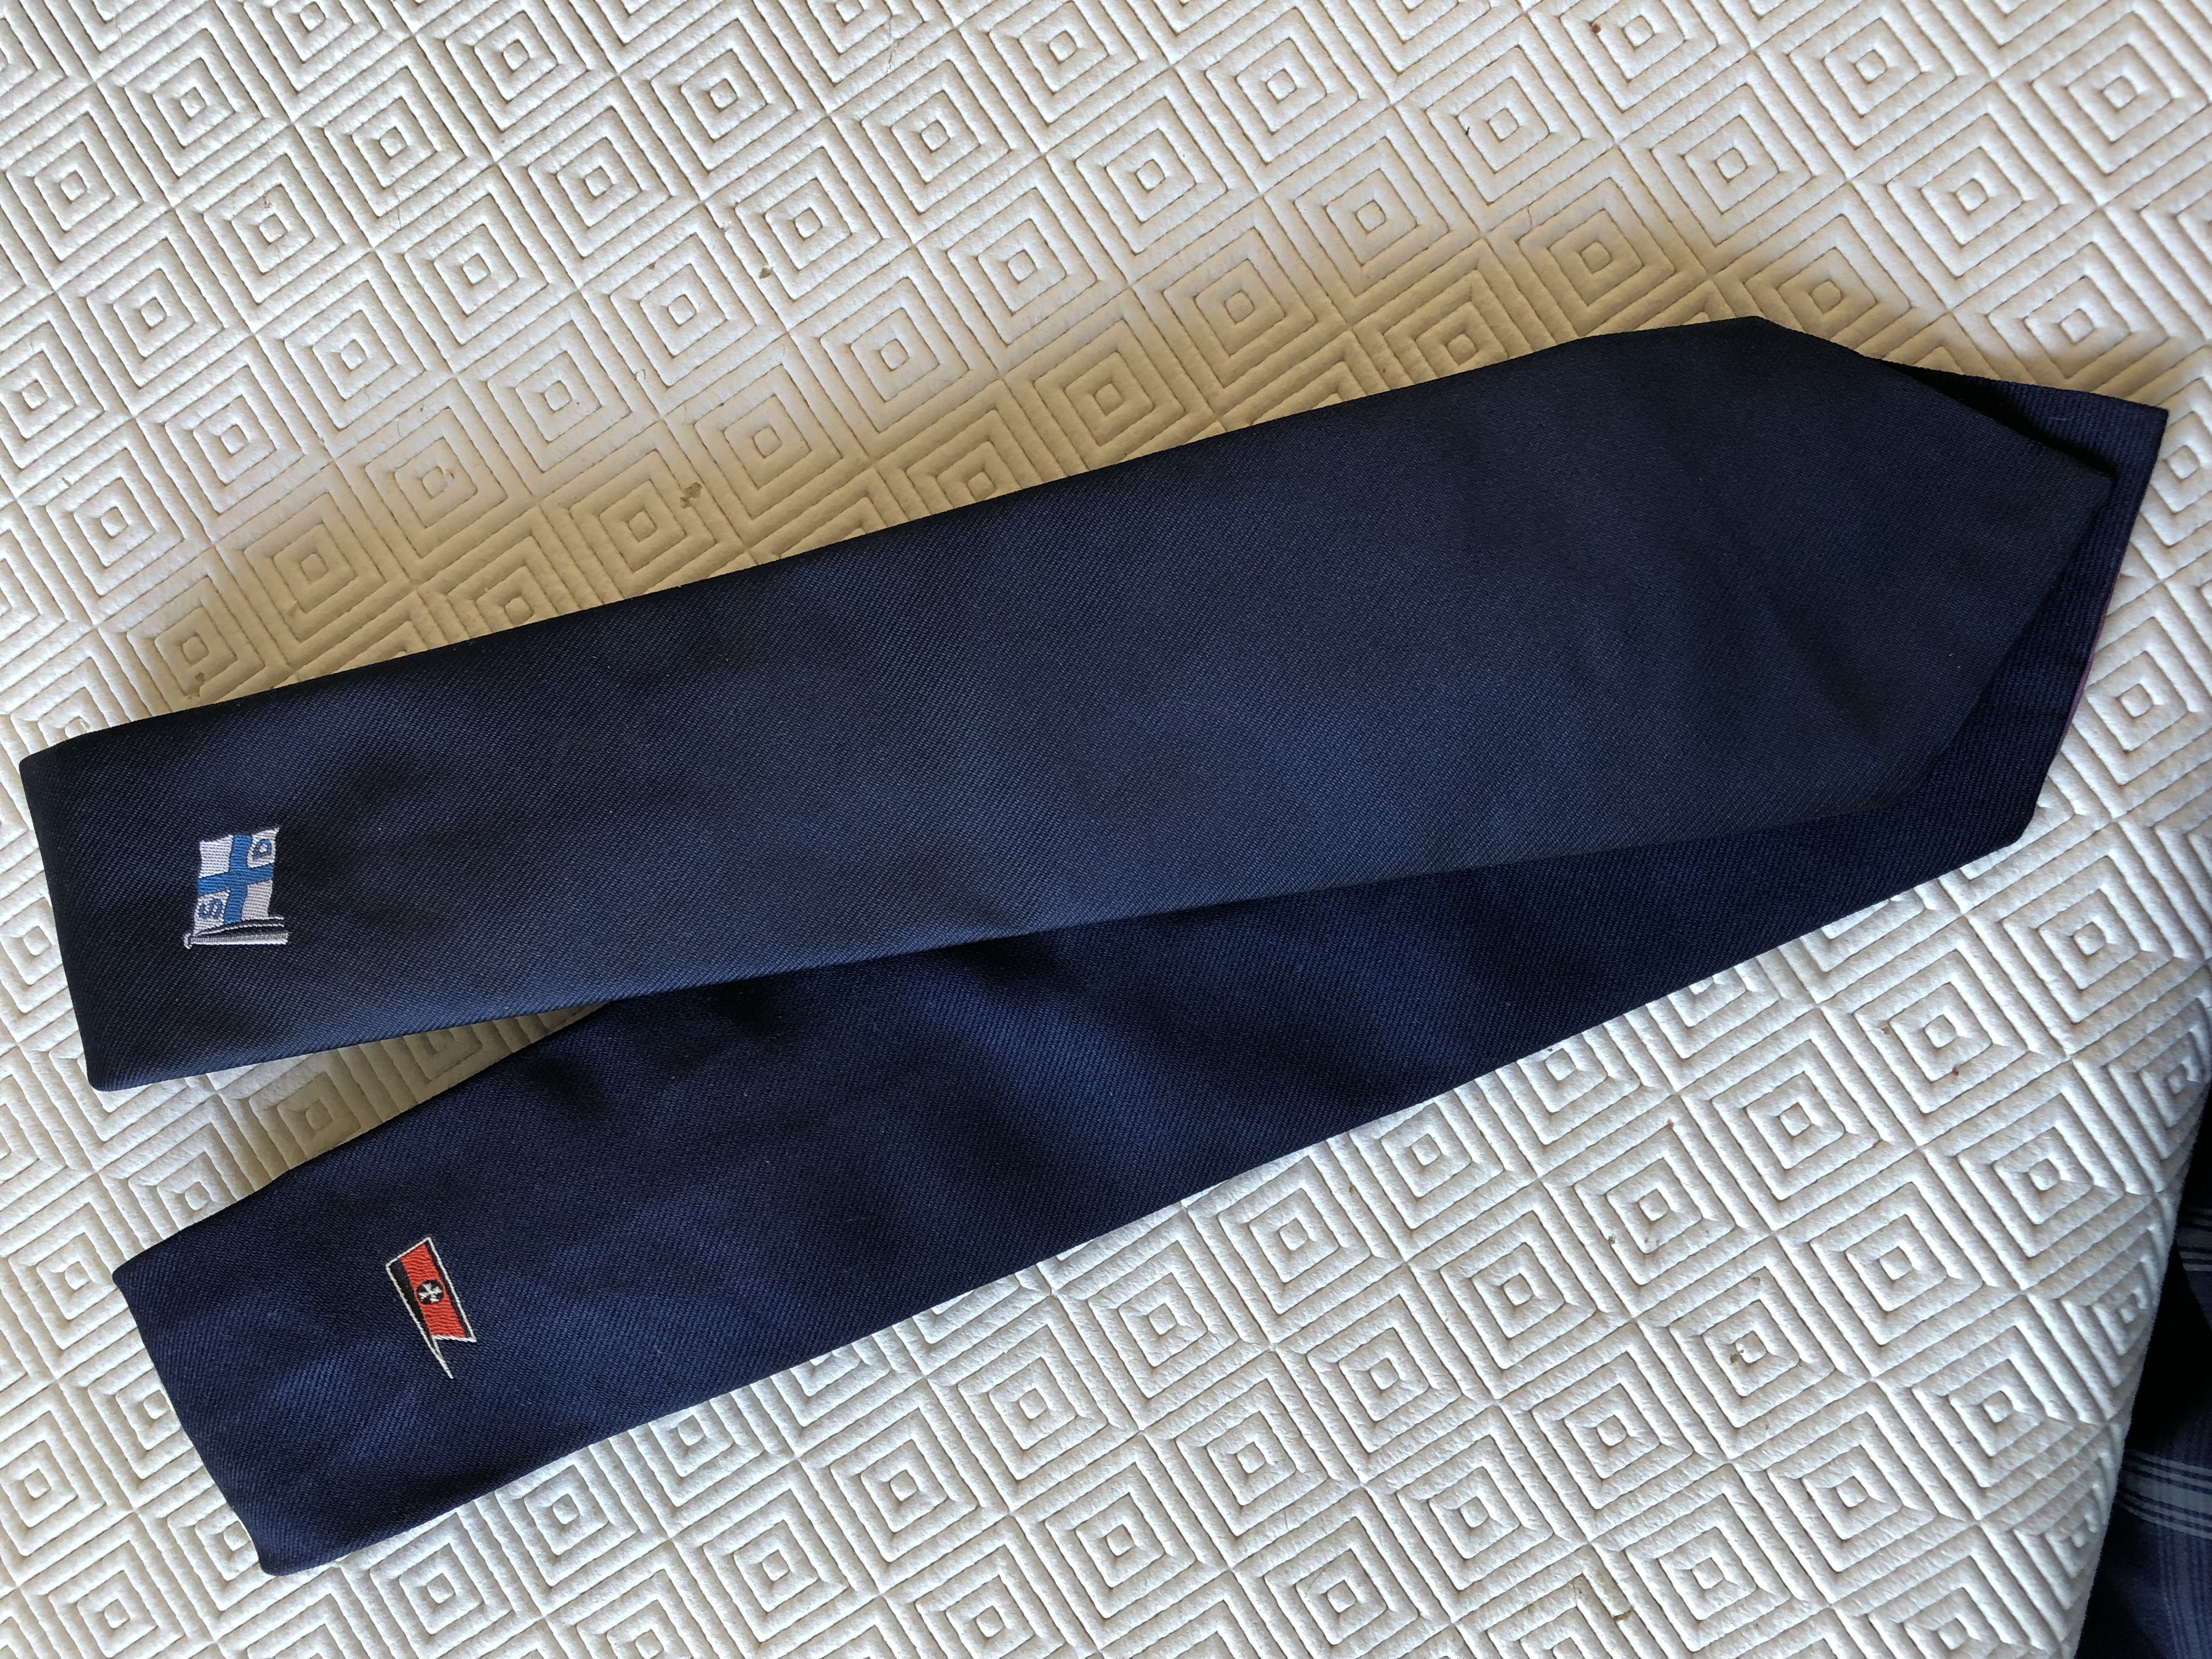 PAIR OF OLD SHIPPING COMPANY TIES FROM SCANDINAVIAN SHIPPING SOURCES